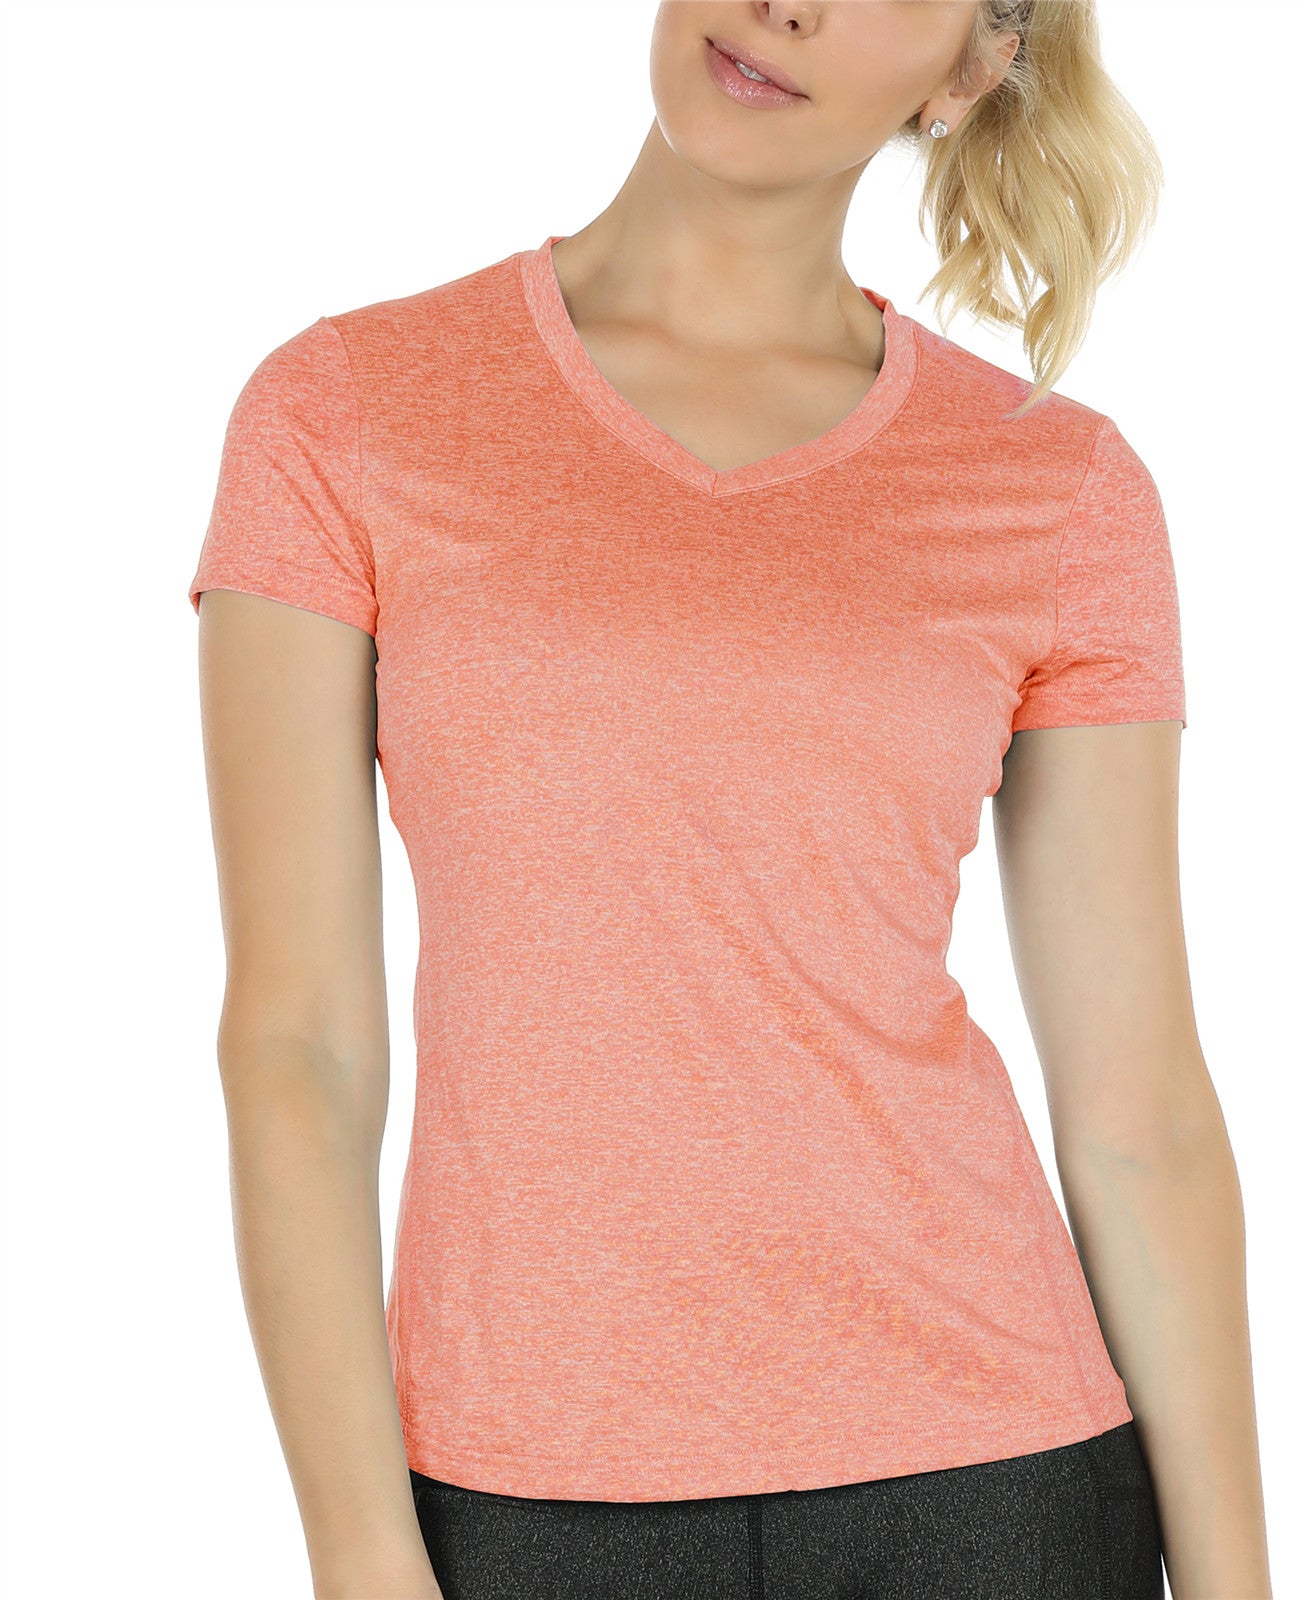 Short Sleeve Workout Shirts for Women for Soccer